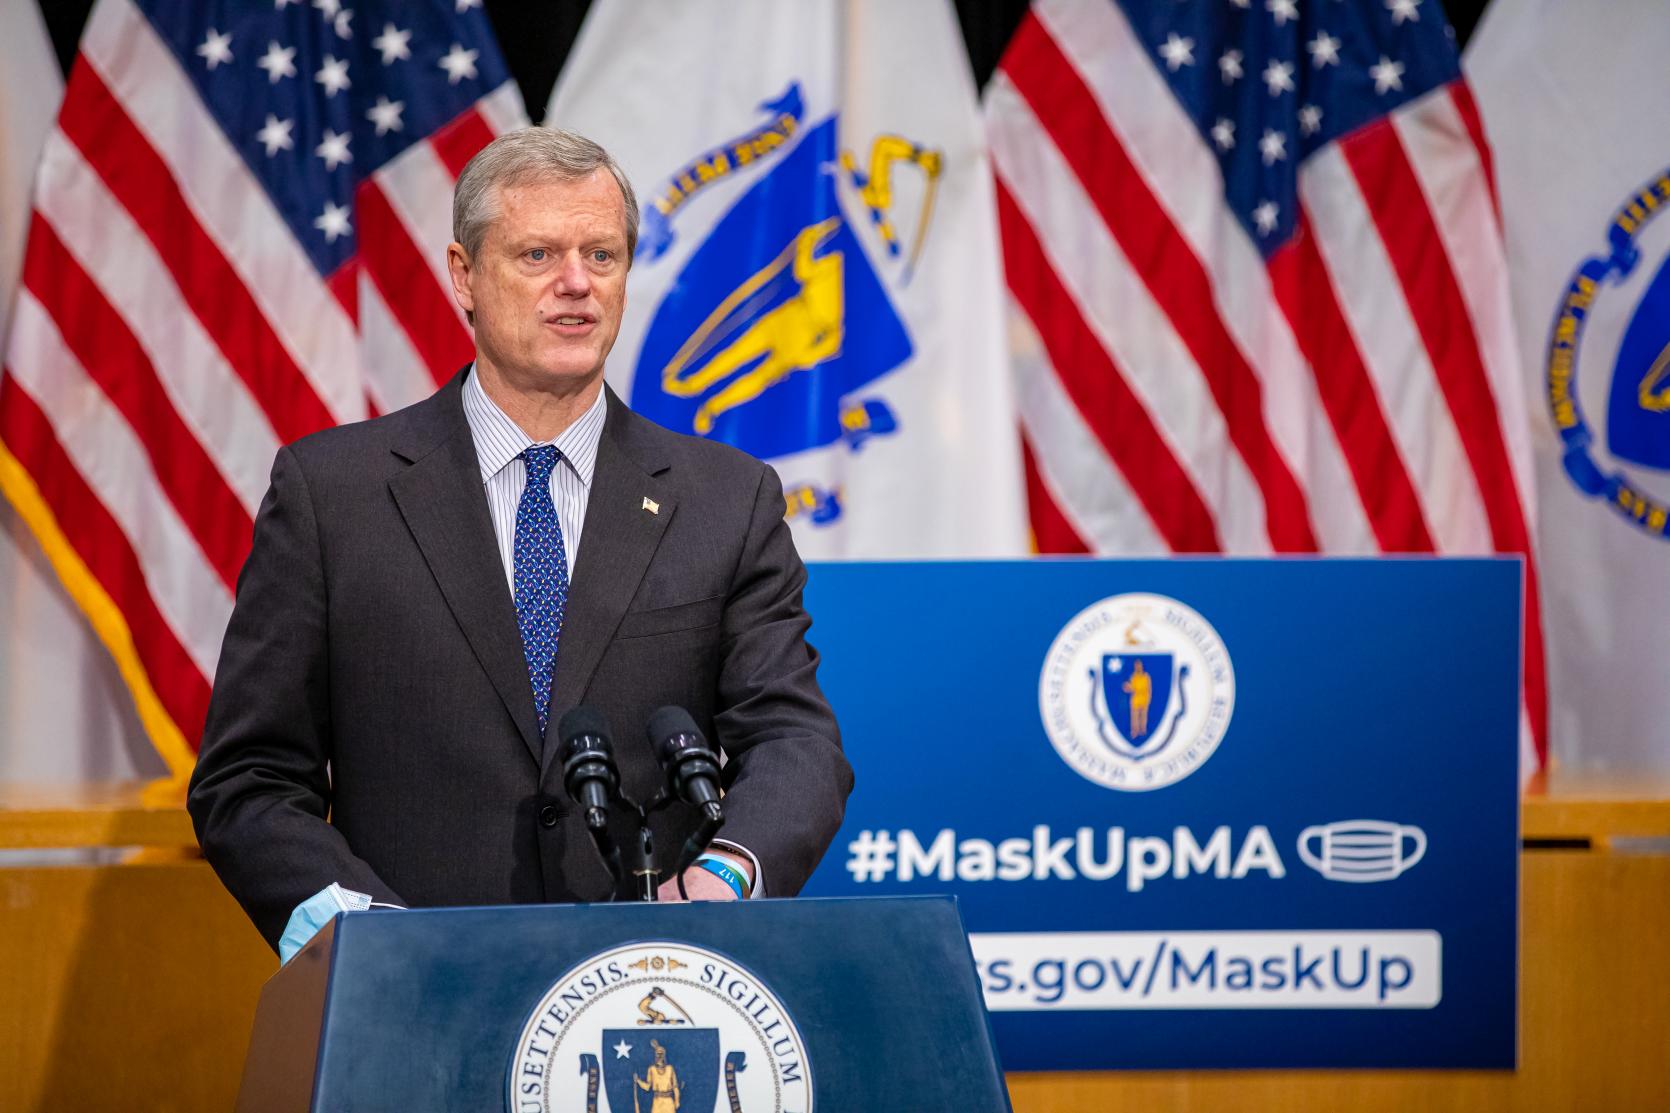 Baker-Polito Administration Files Legislation To Maintain Unemployment Trust Fund, Provide Employer Relief